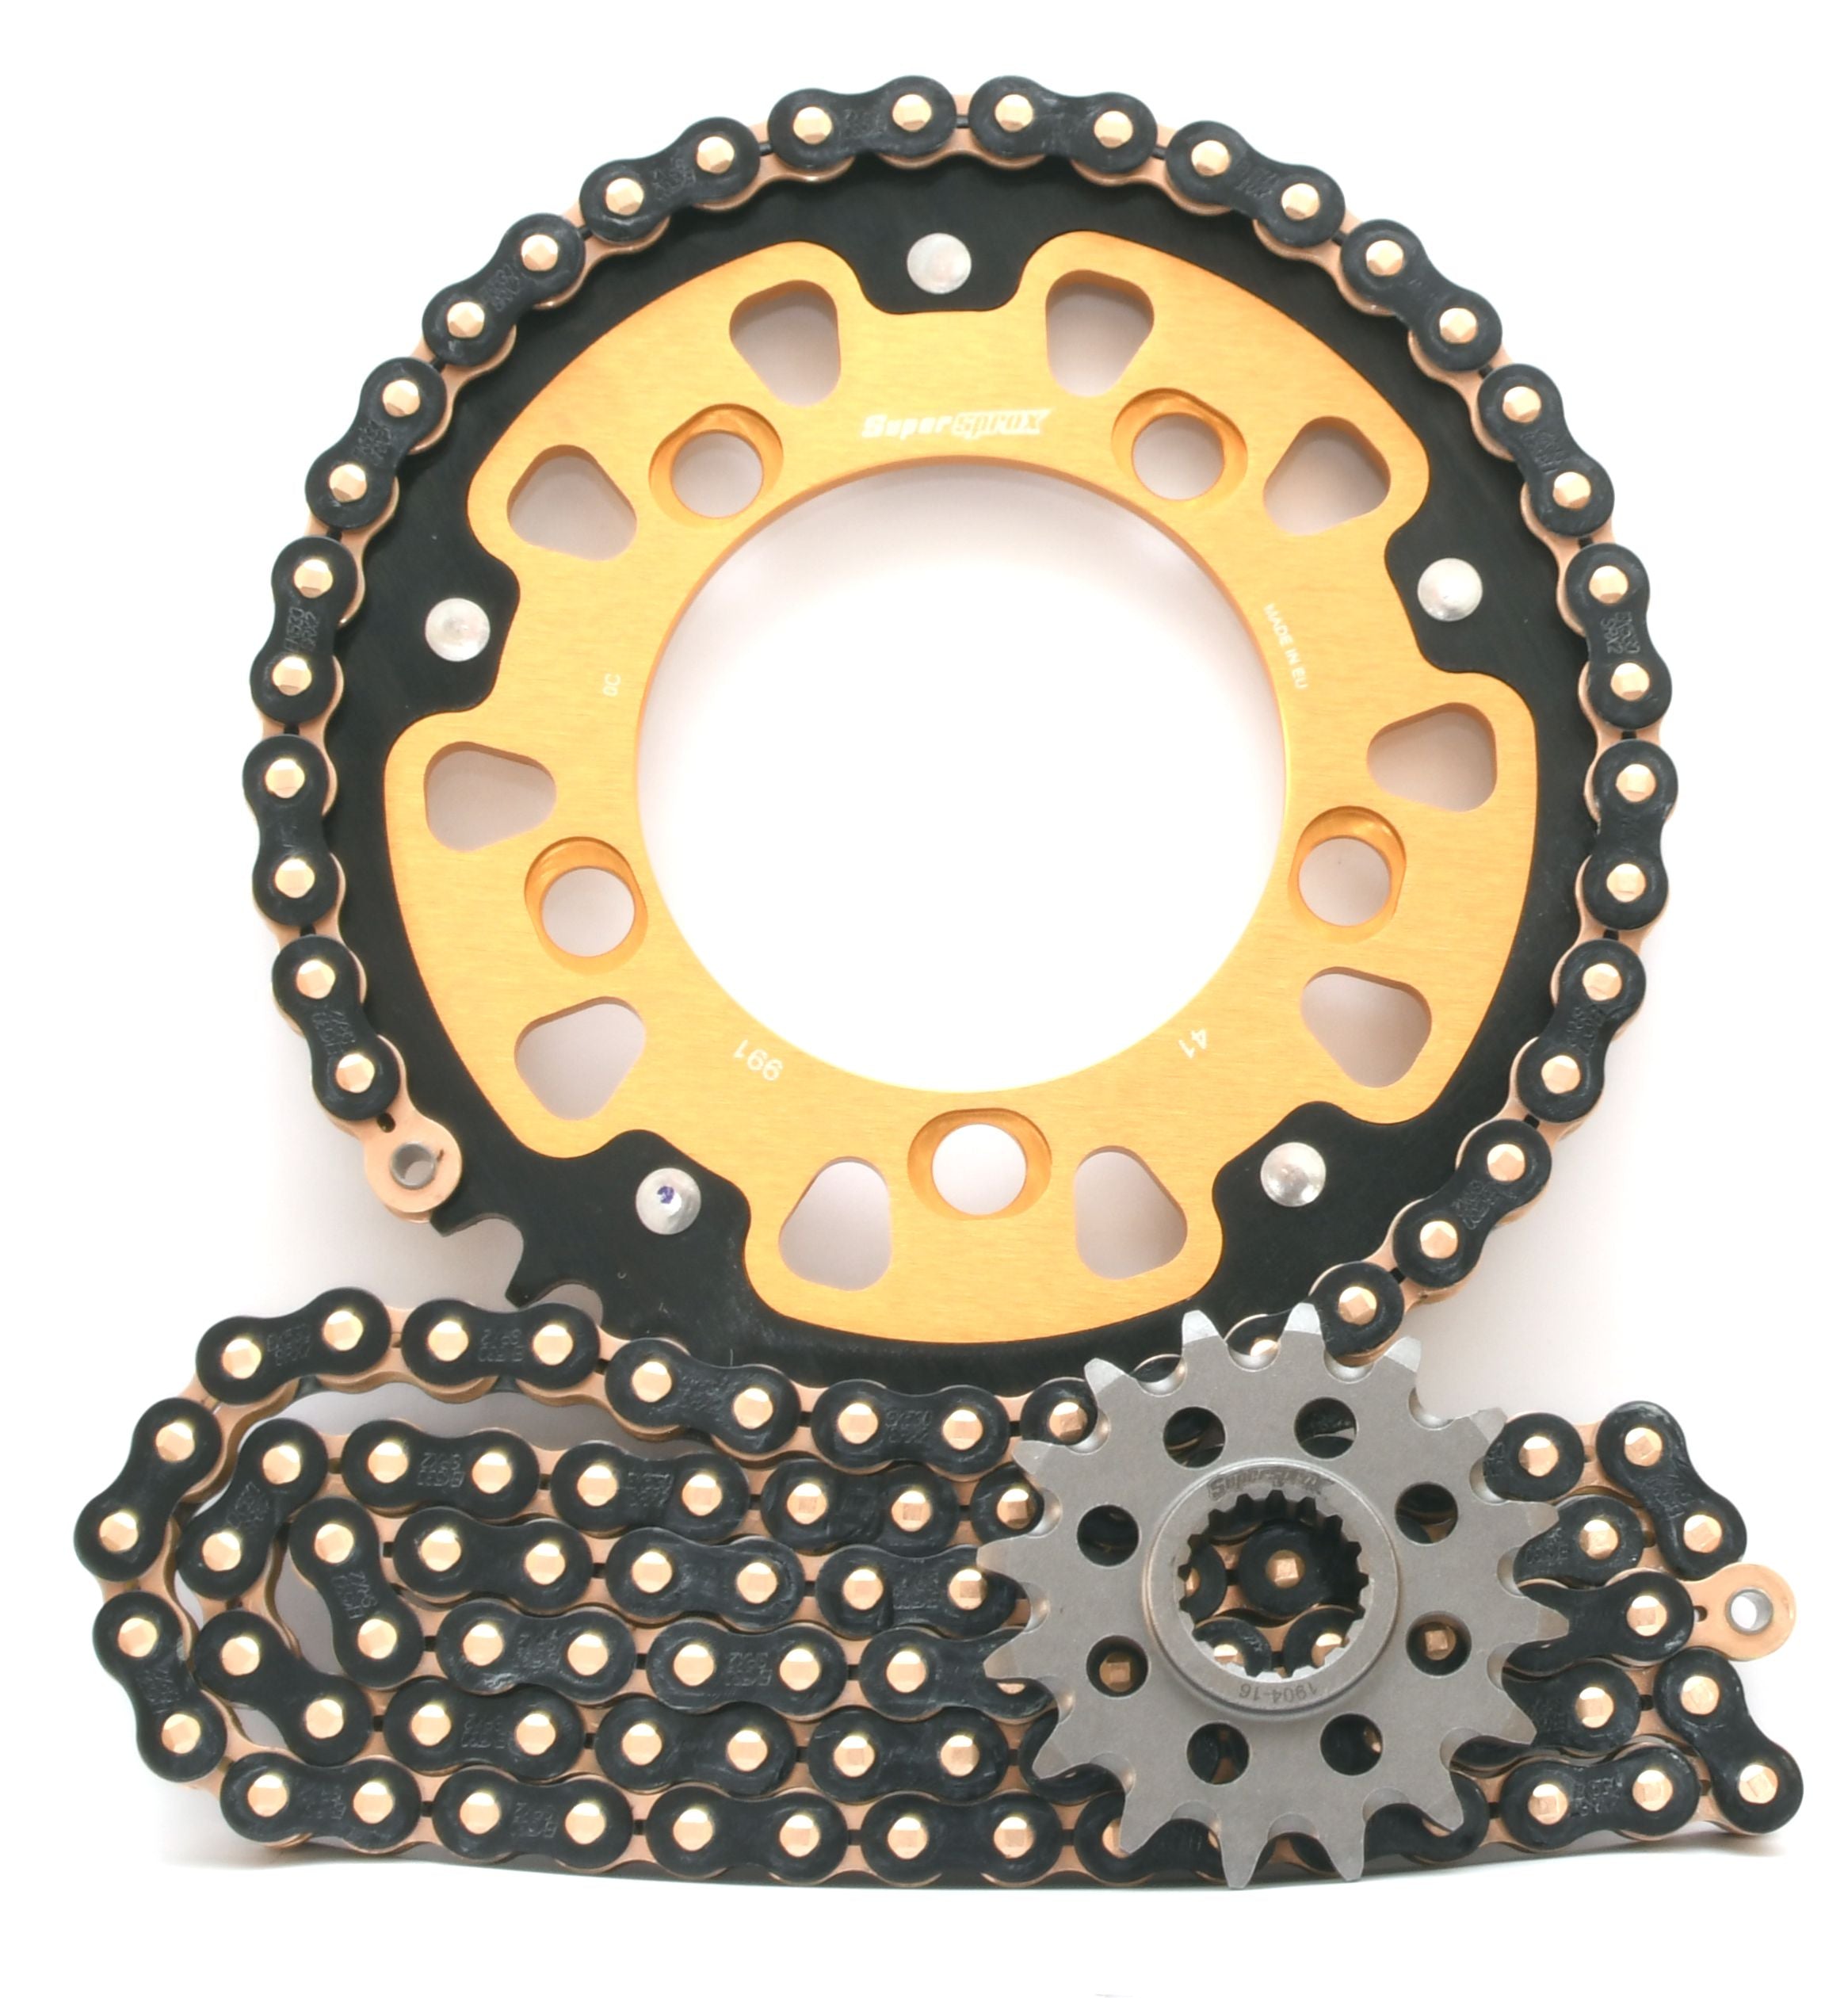 Supersprox Chain & Sprocket Kit for KTM 950/990 Supermoto (Inc R/T) 05-13 - Choose Your Gearing